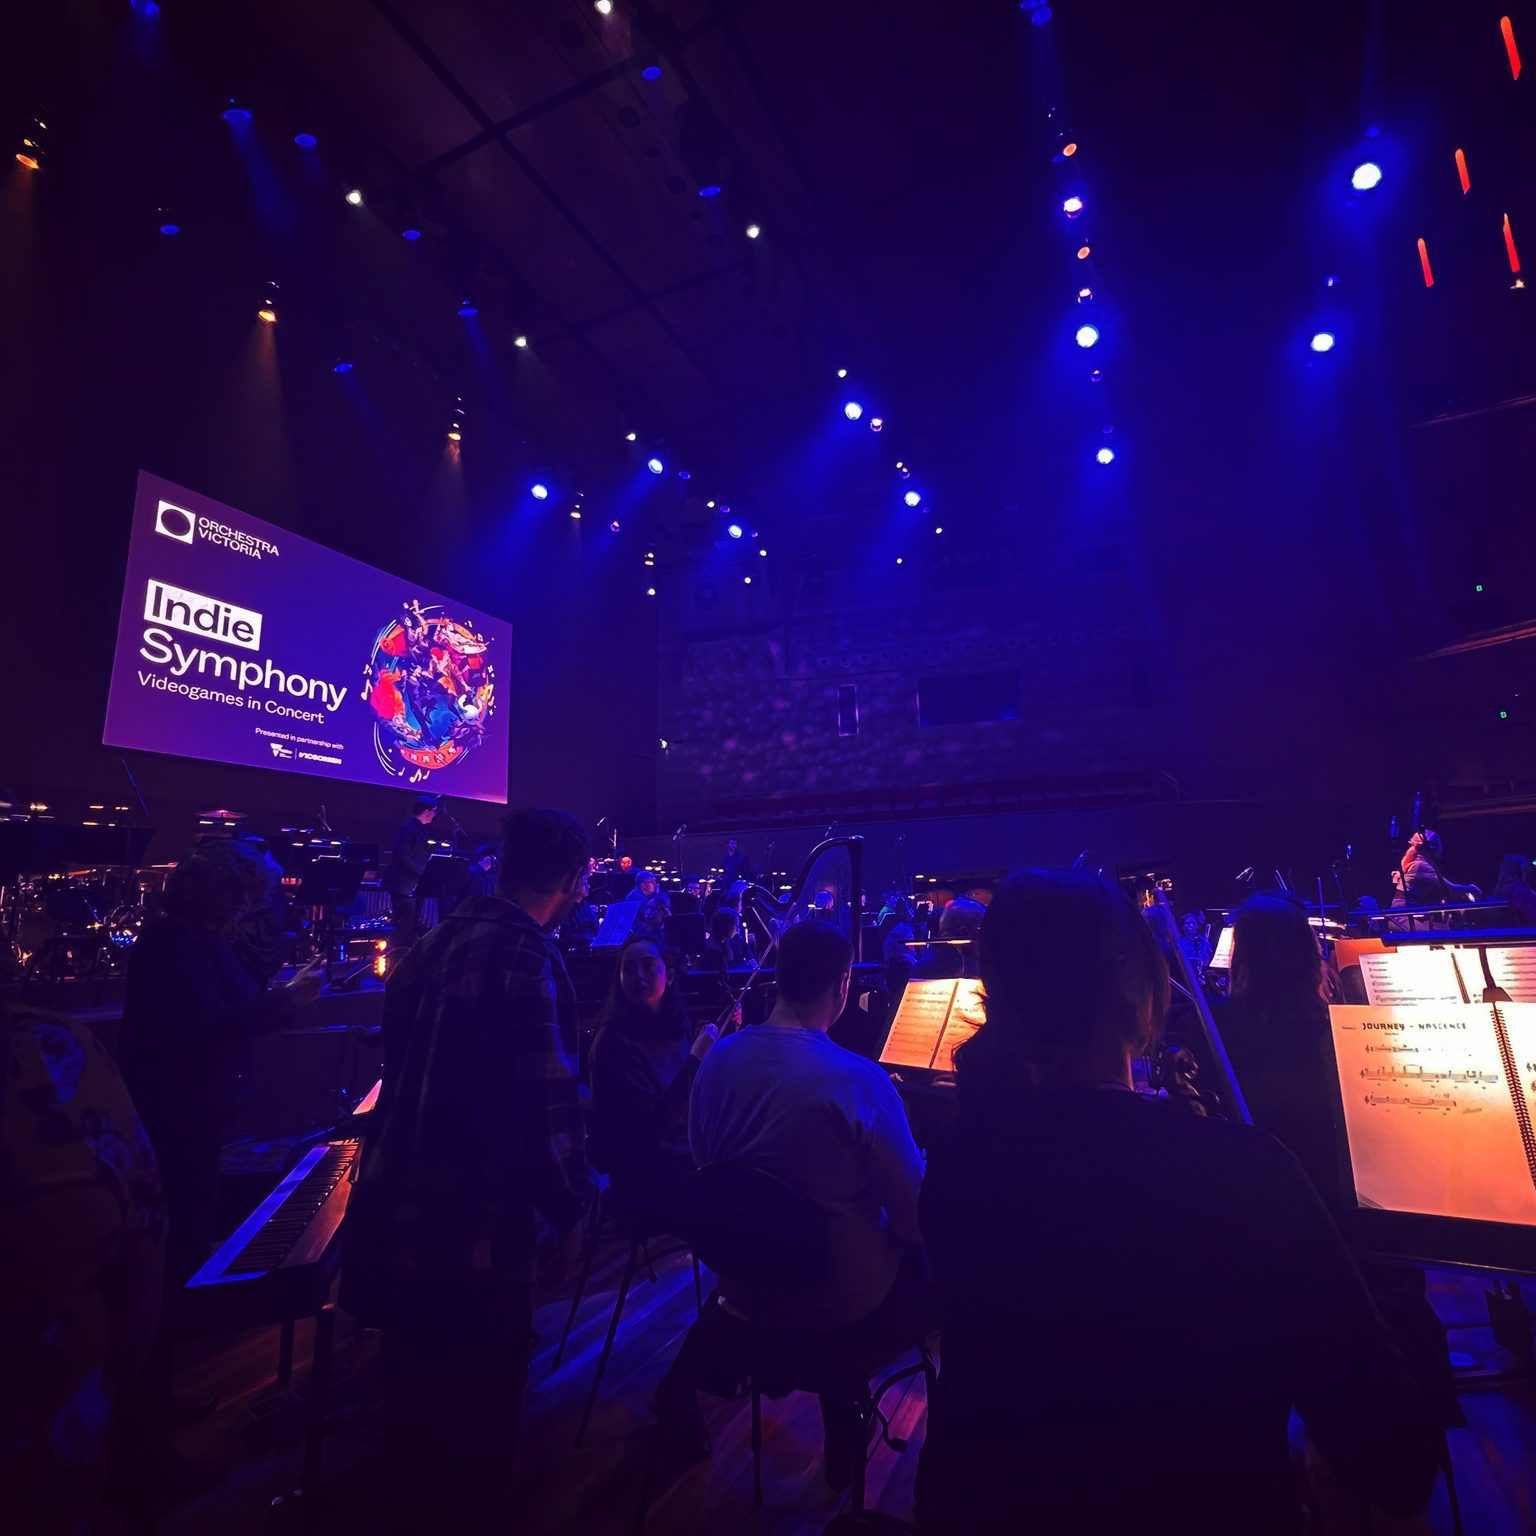 Indie Symphony – Video Games in Concert